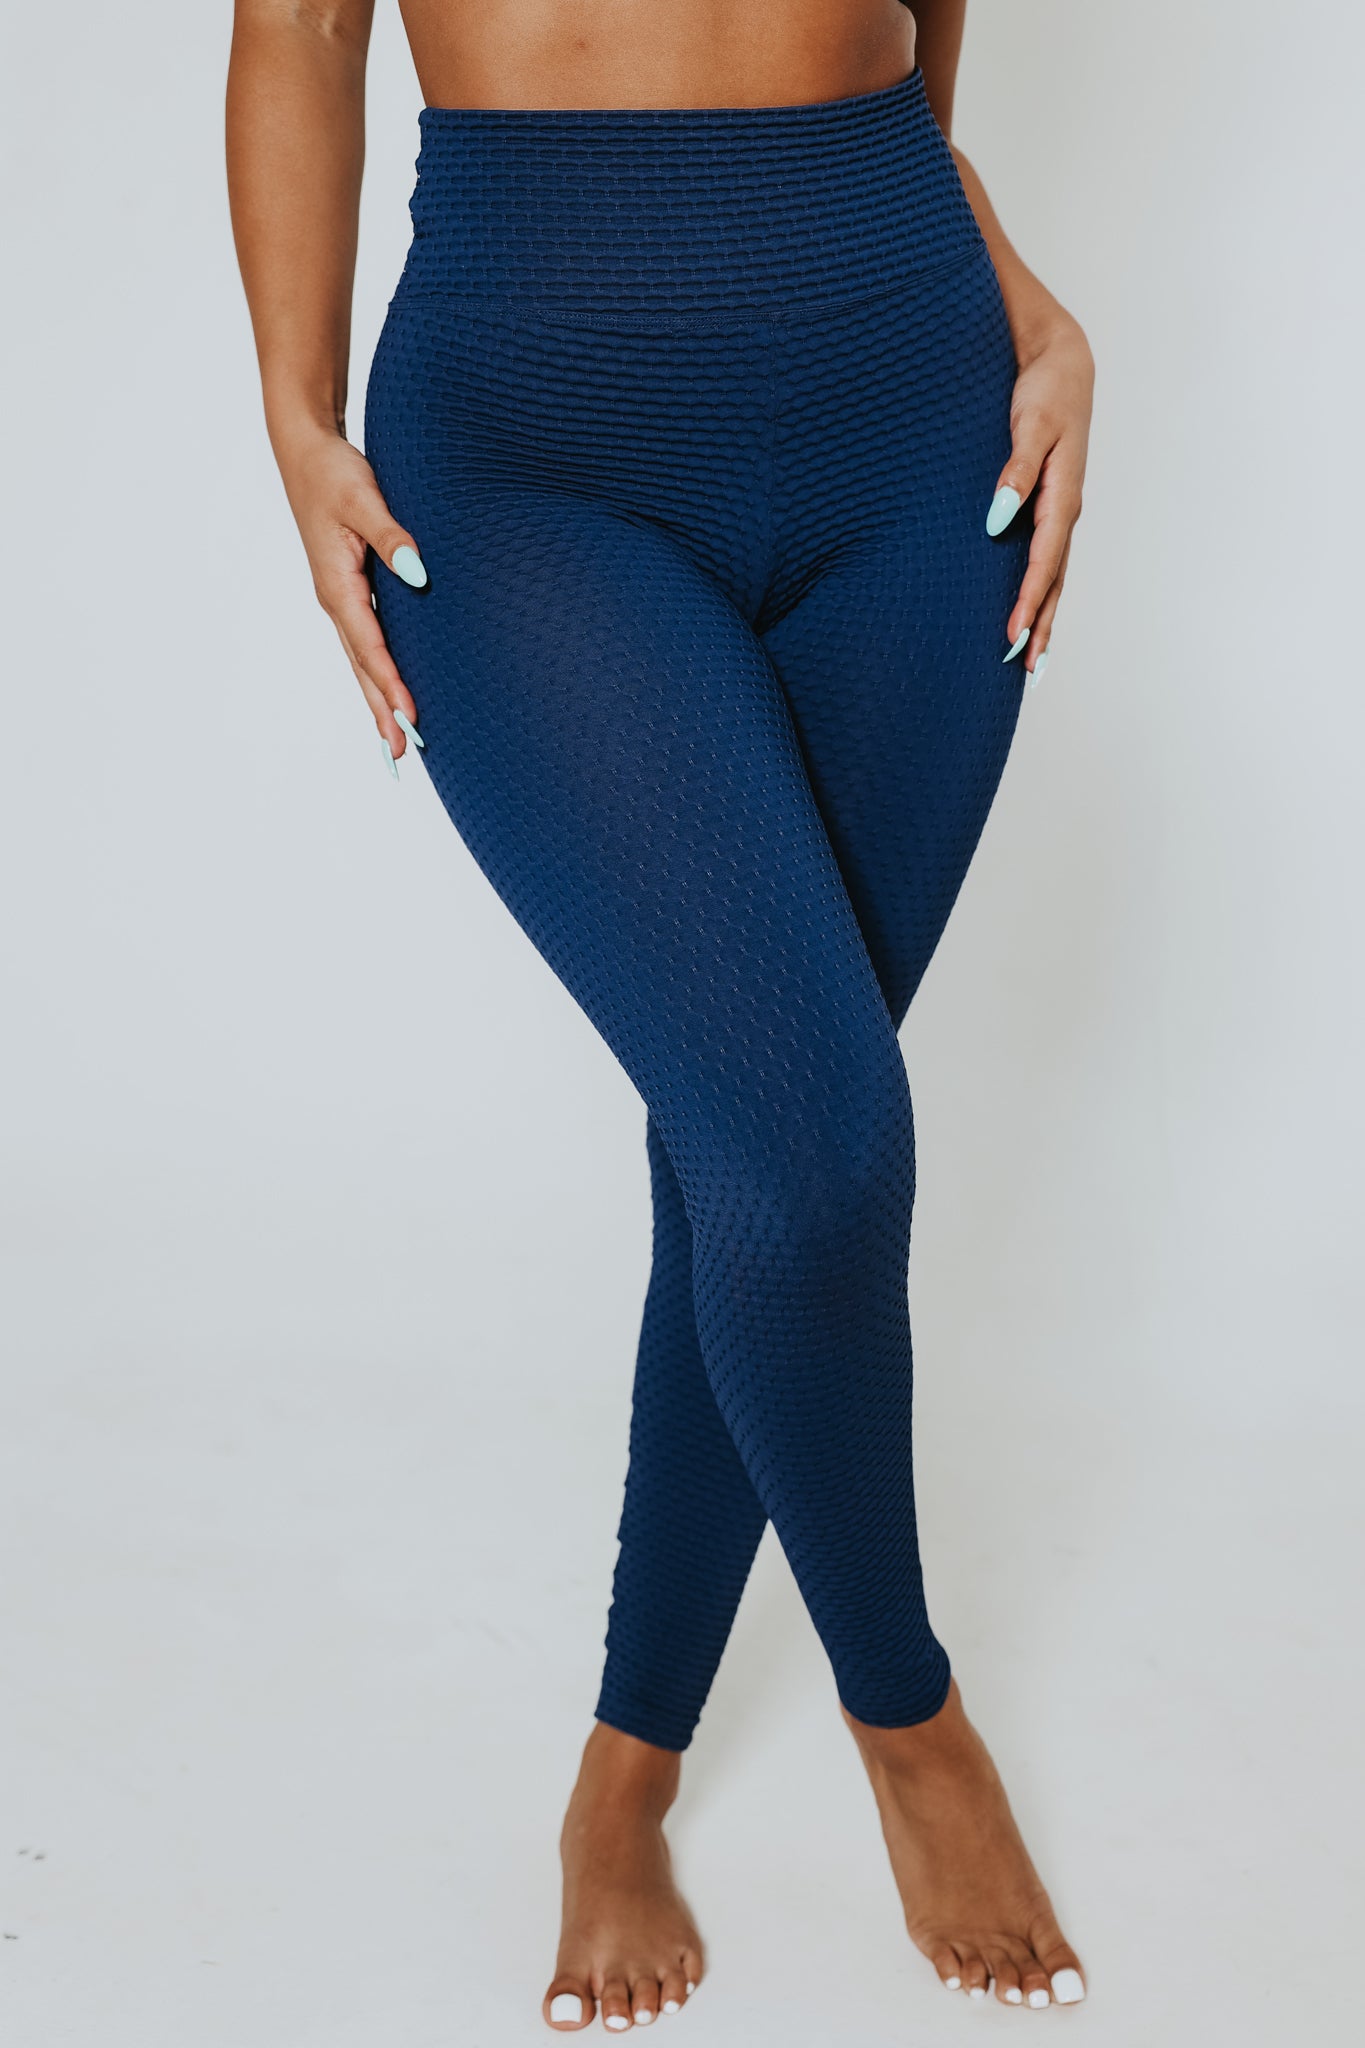 Ada- Navy Blue – Not Only Pants